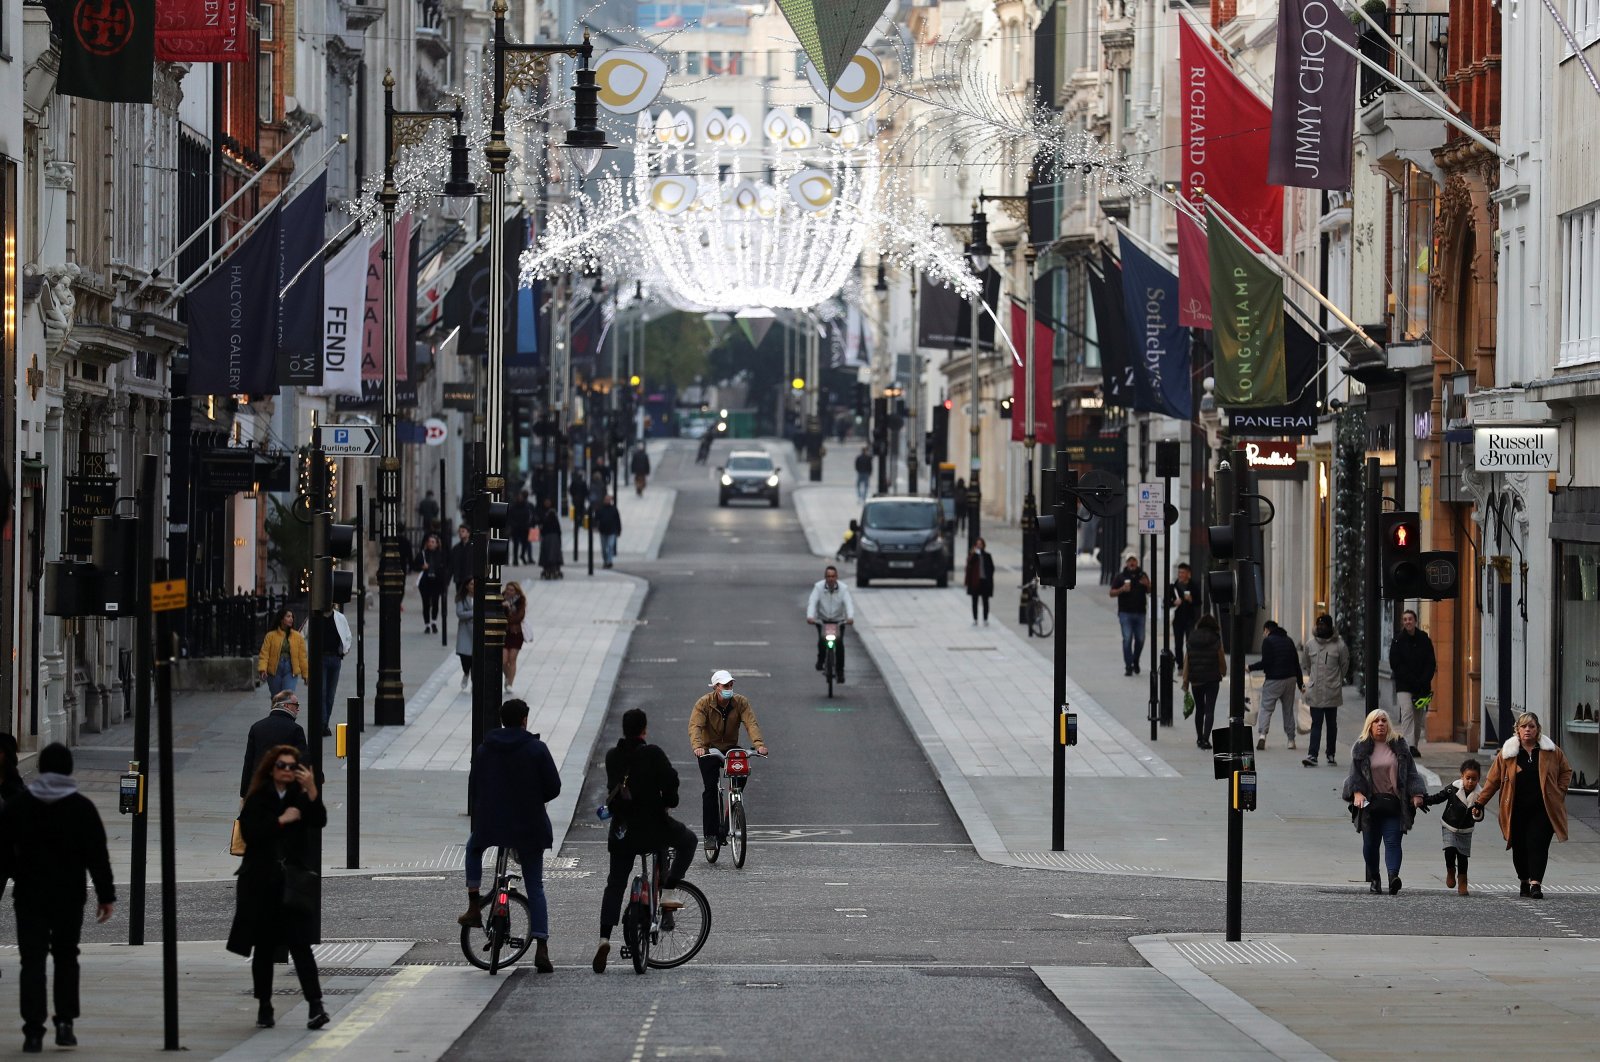 Pedestrians and cyclists move through New Bond Street amid the COVID-19 outbreak in London, Britain, Nov. 7, 2020. (Reuters Photo)